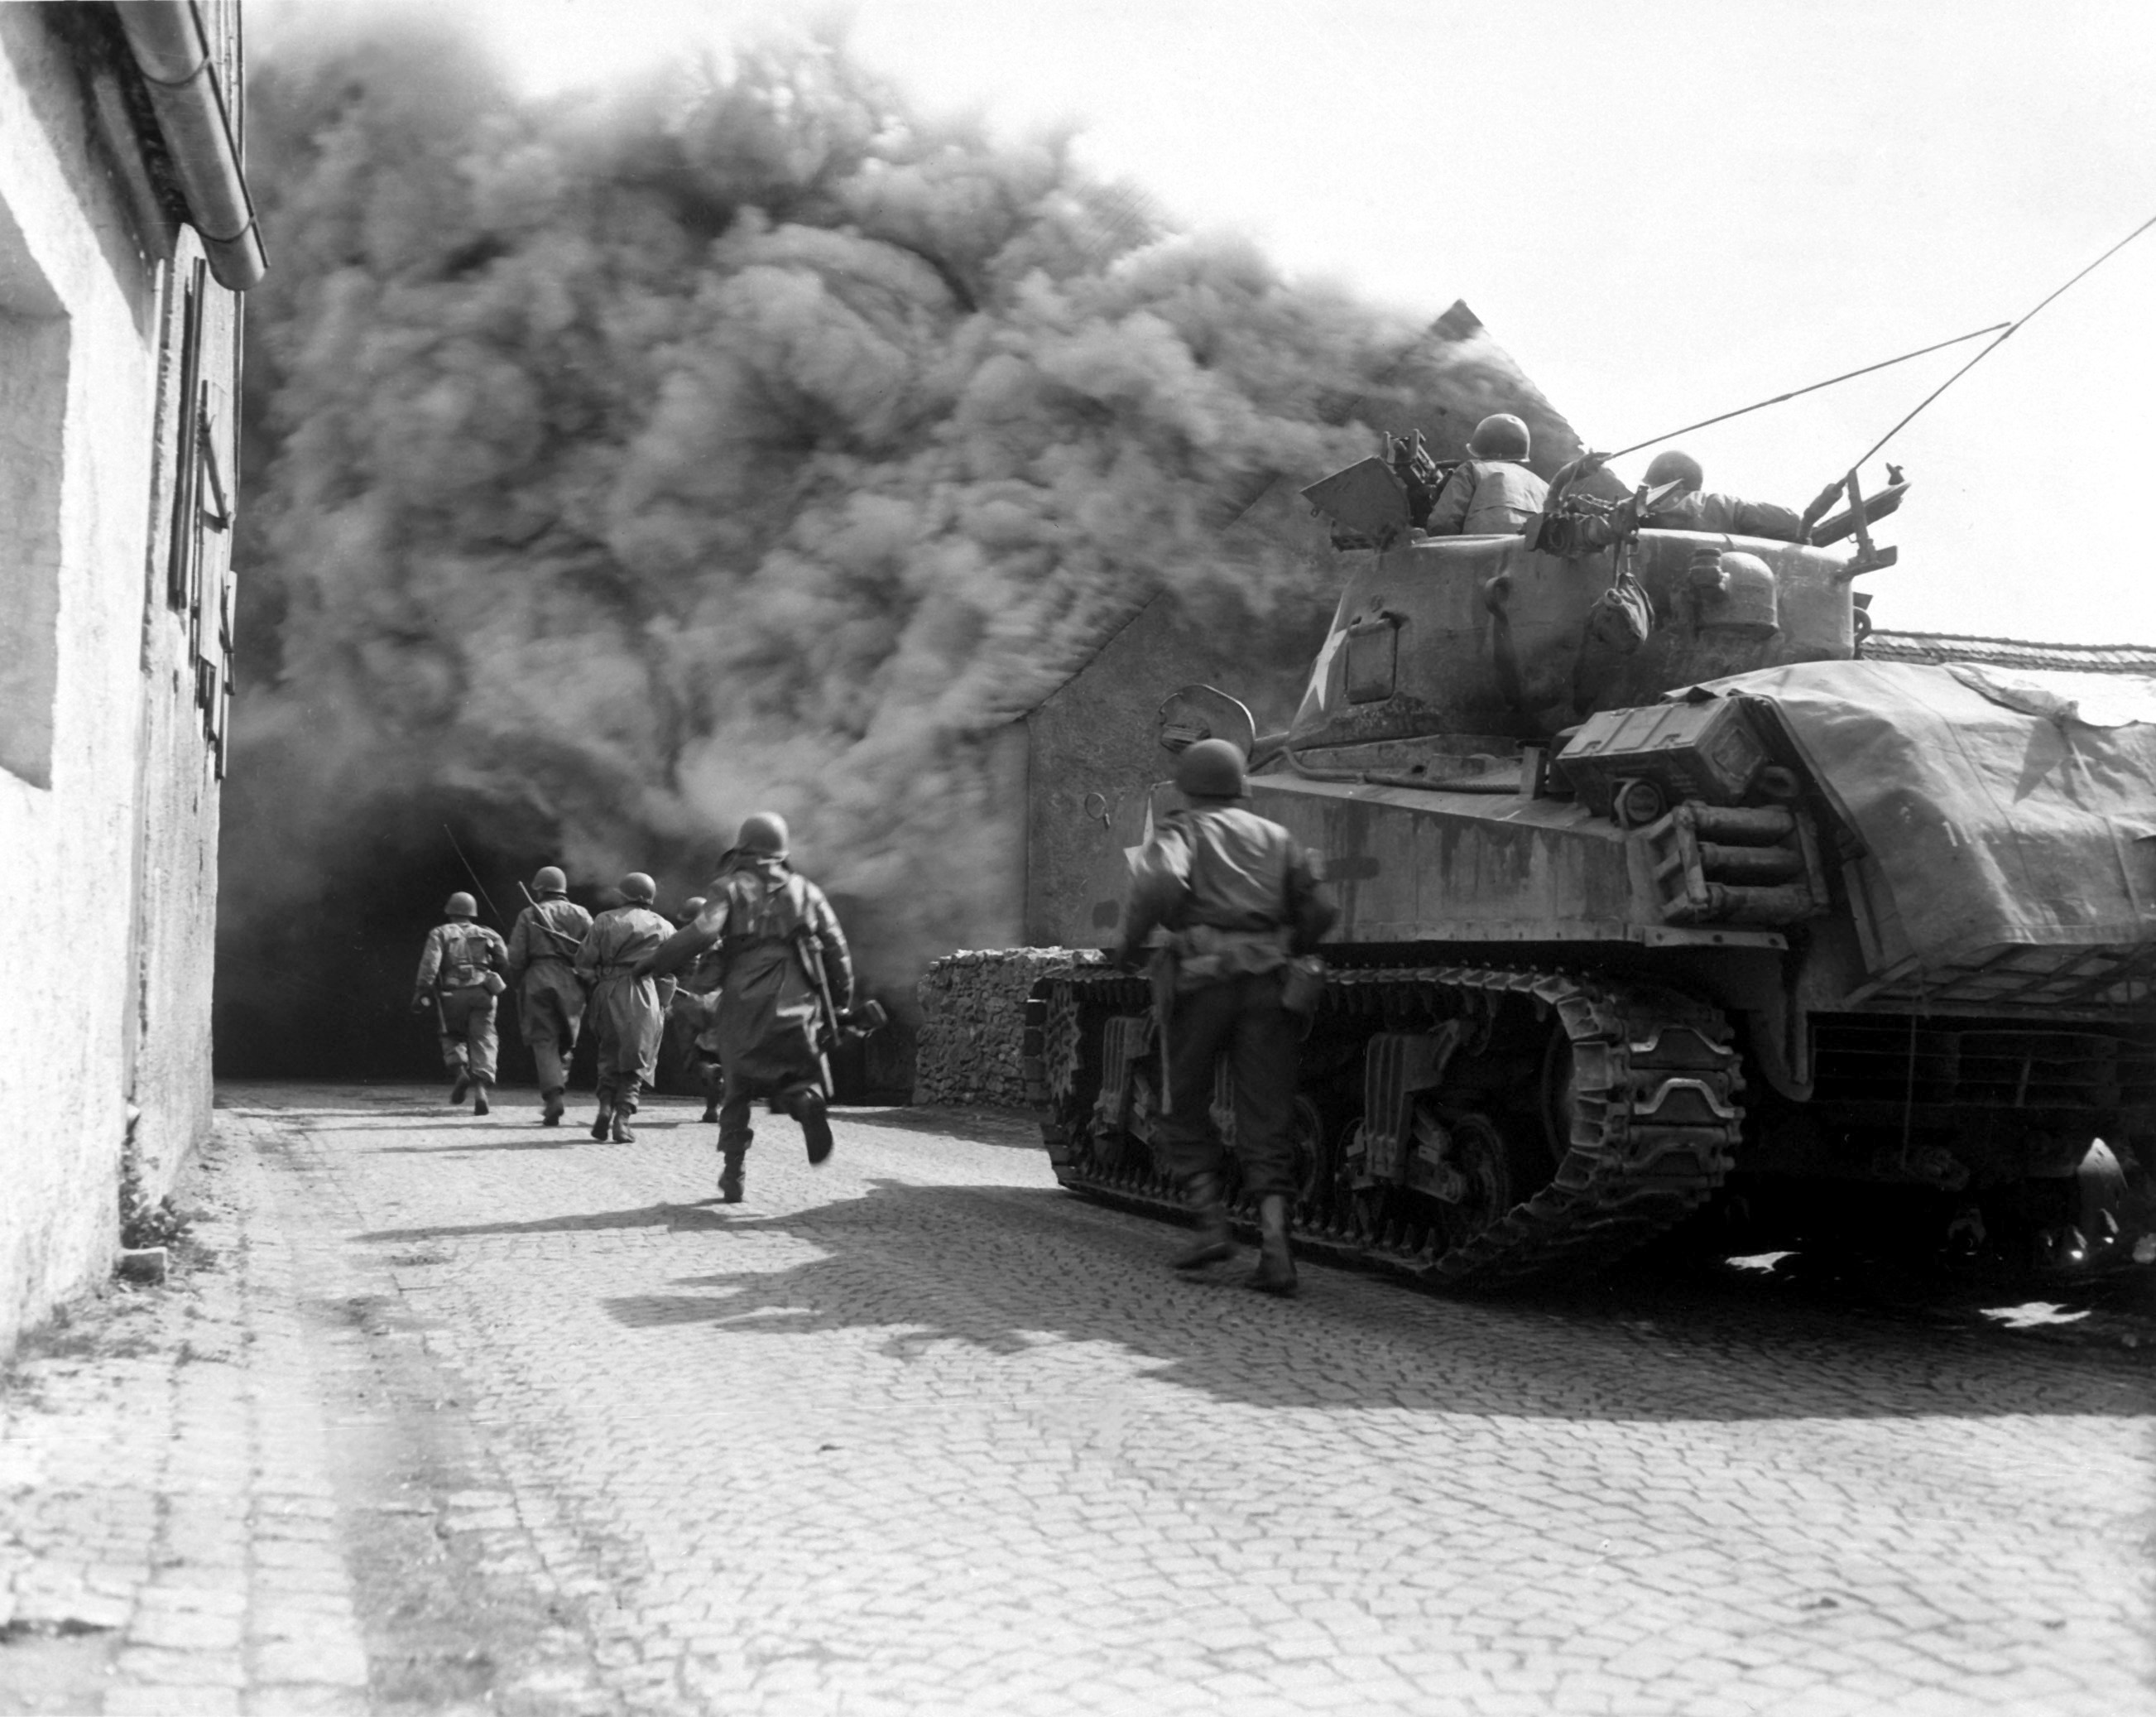 US 55th Armored Infantry Battalion men and US 22nd Tank Battalion tank in Wernberg, Bayreuth, Germany, 22 Apr 1945